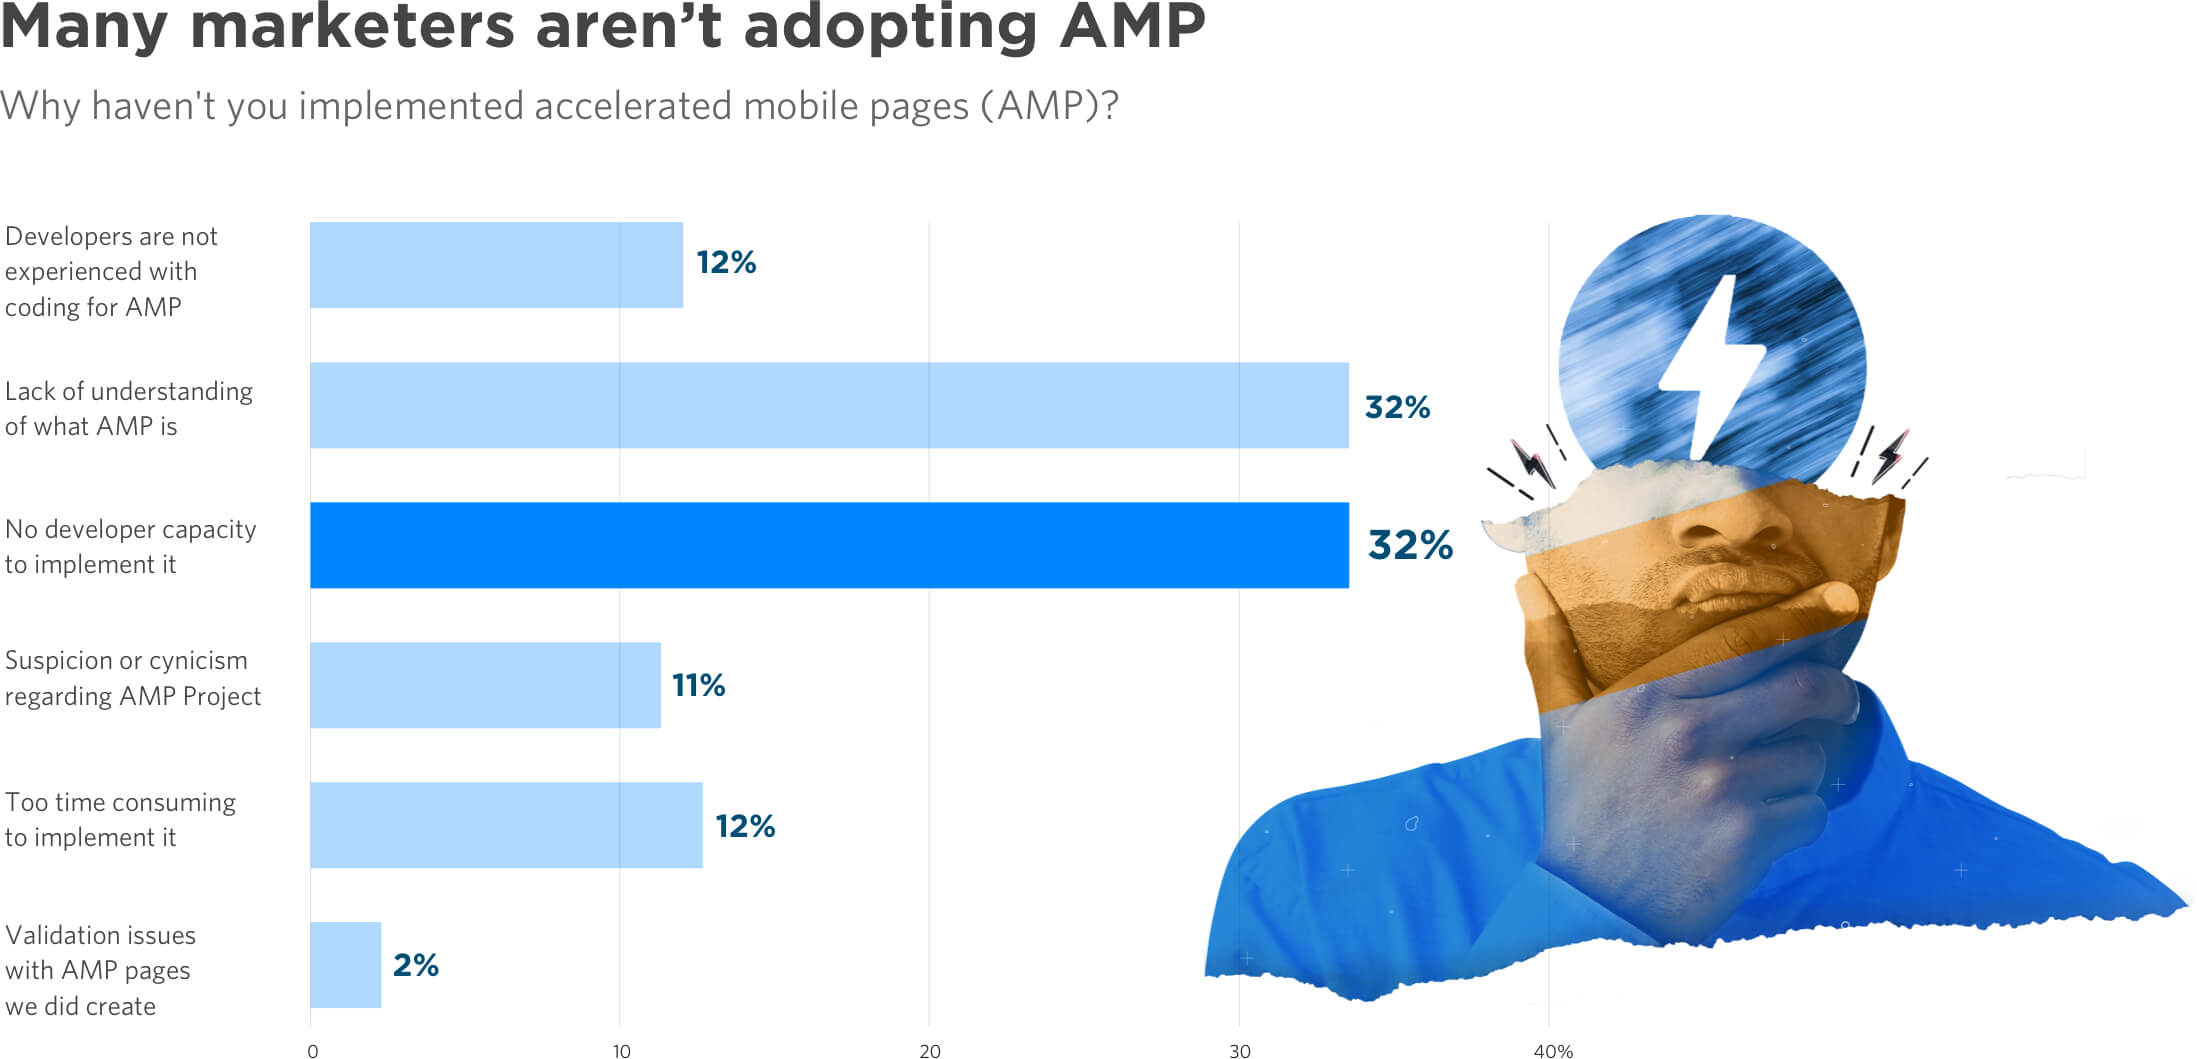 Marketers have been slow to adopt AMP